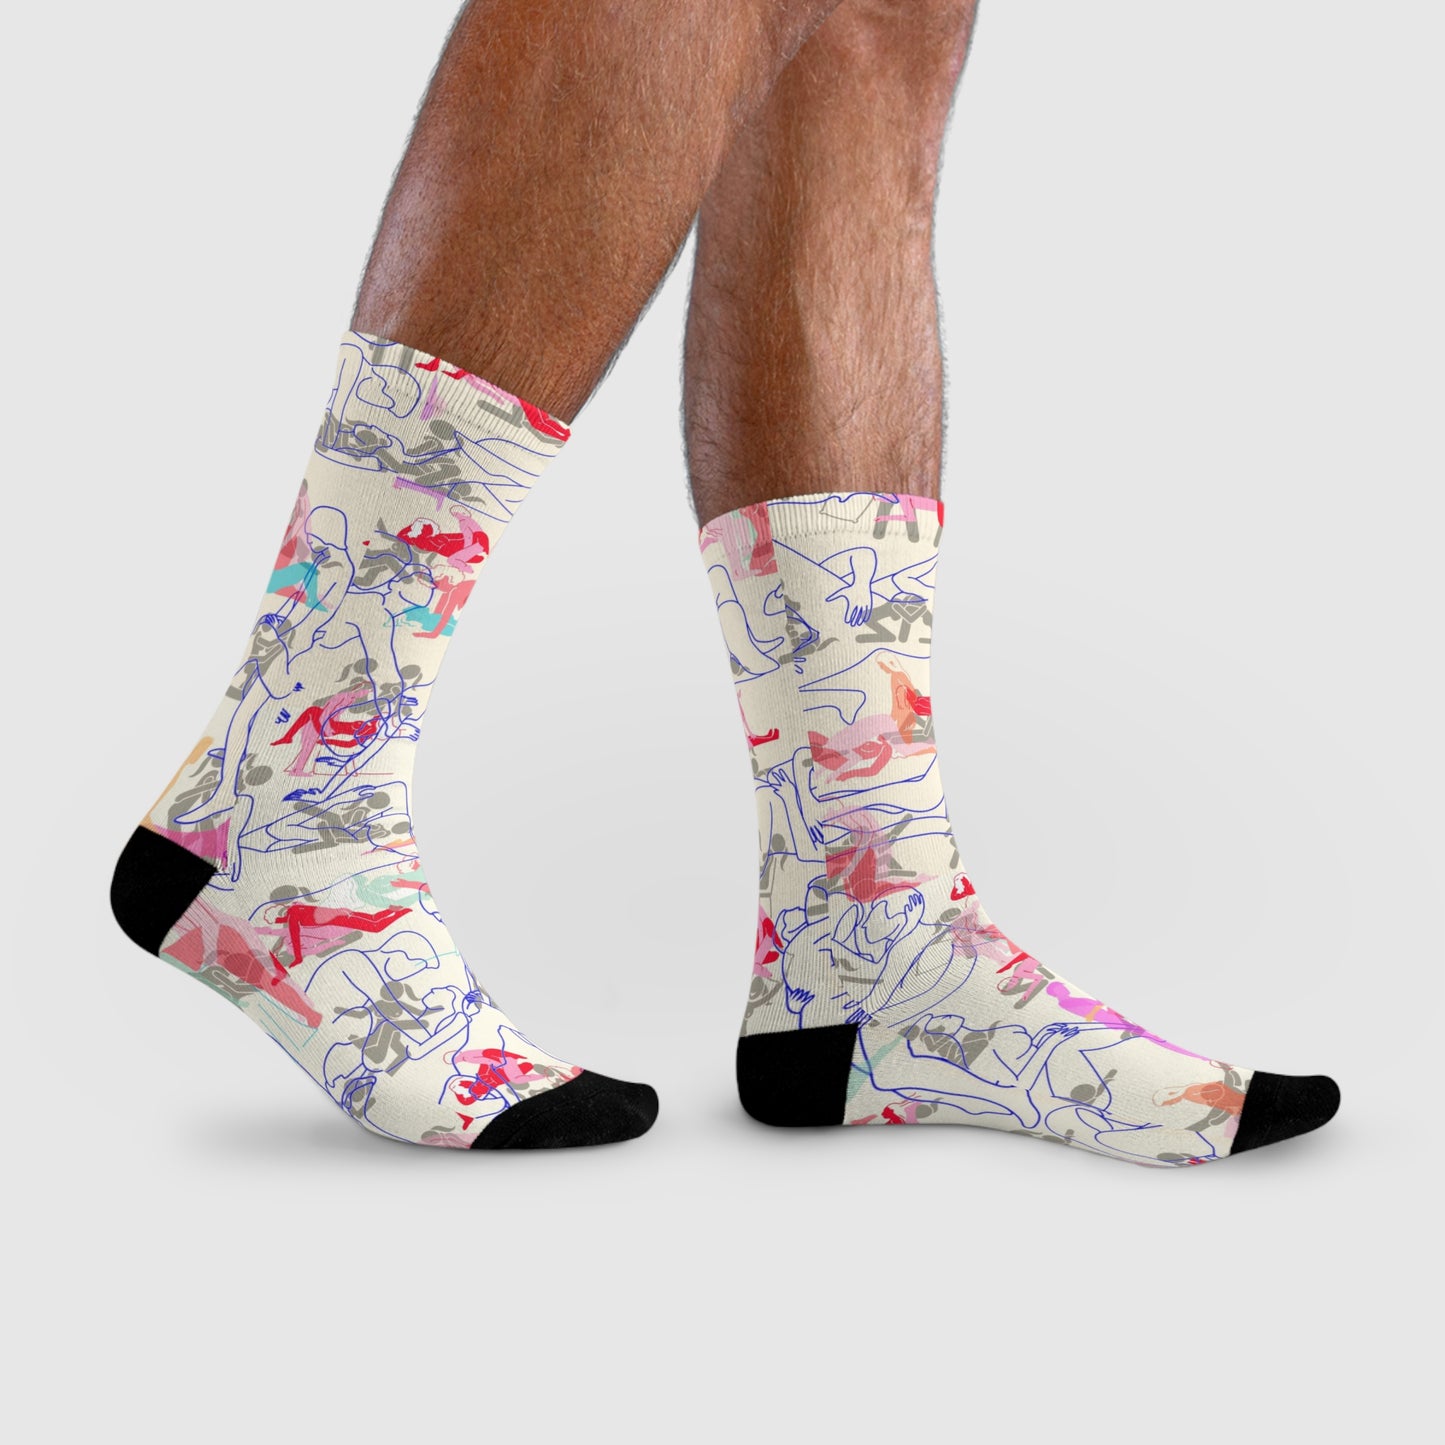 BISEXUAL ORGY Sublimation Crew Socks